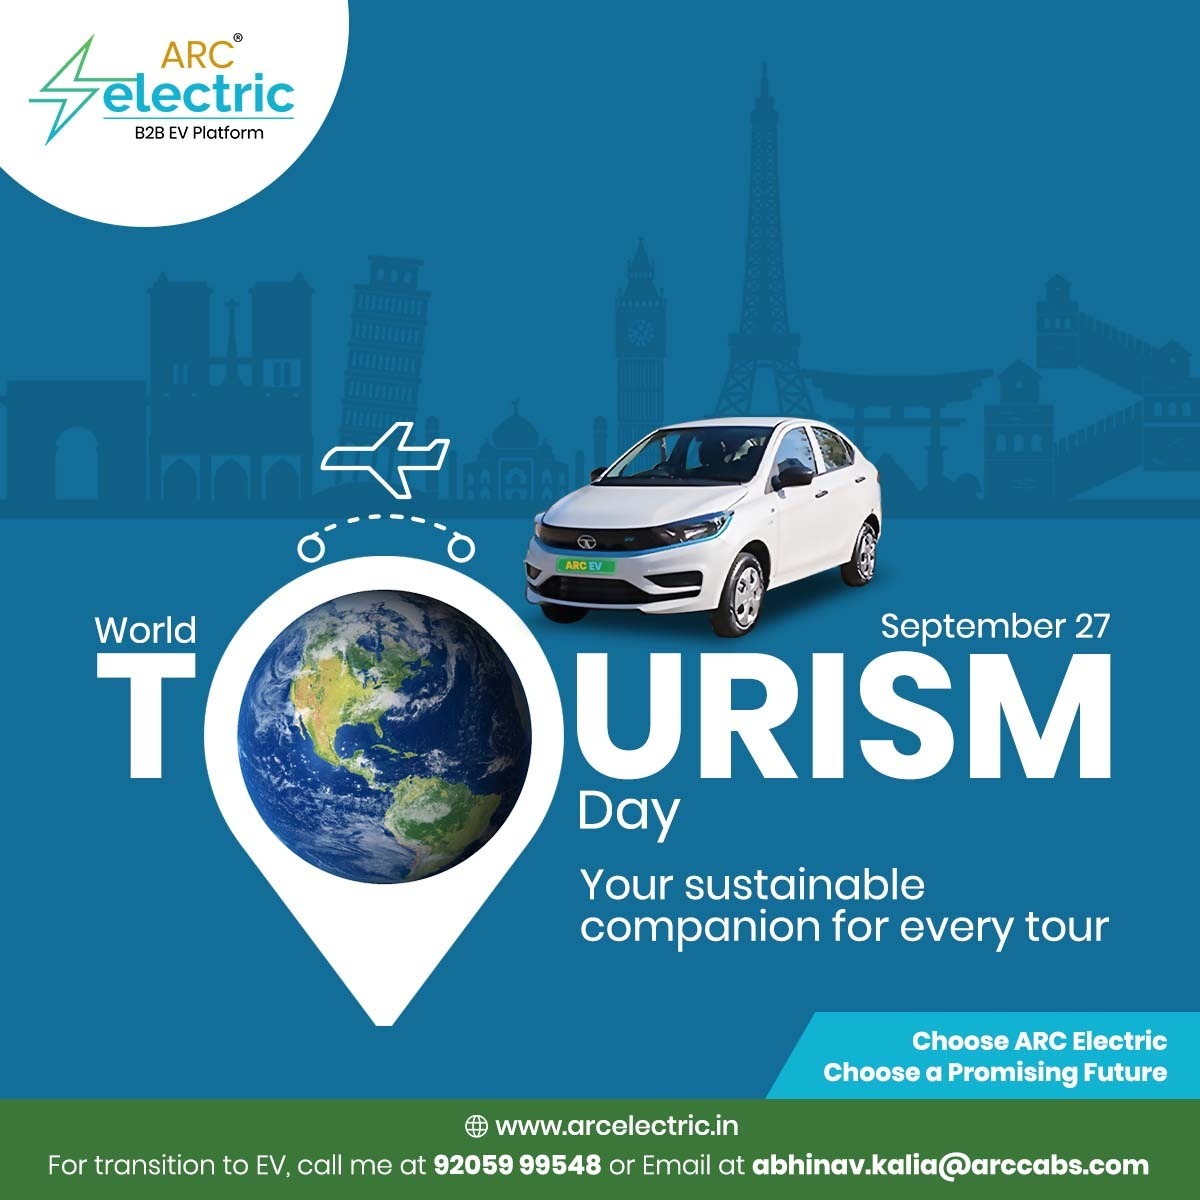 Travel the world, reduce your carbon footprint. Celebrate World Tourism Day with us by choosing our eco-friendly EV cabs for your next adventure. 

#ARC #Ev #CleanTravel #WorldTourismDay #27september #EcoFriendlyTravel #ElectricVehicles #GreenTravel #GoGreen #TourismForAll